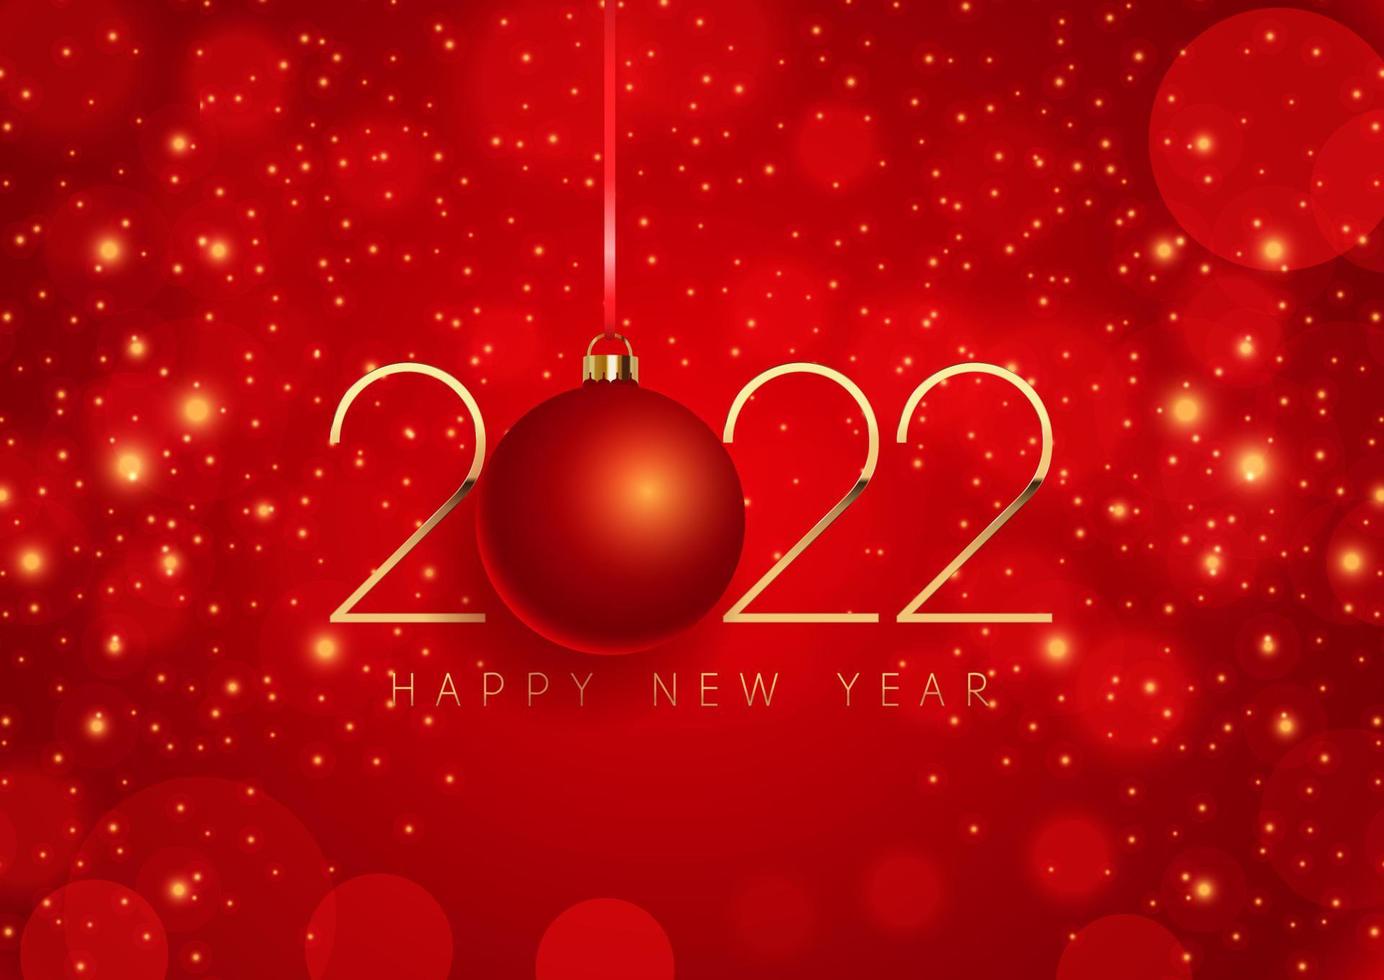 Red and gold Happy New Year background vector